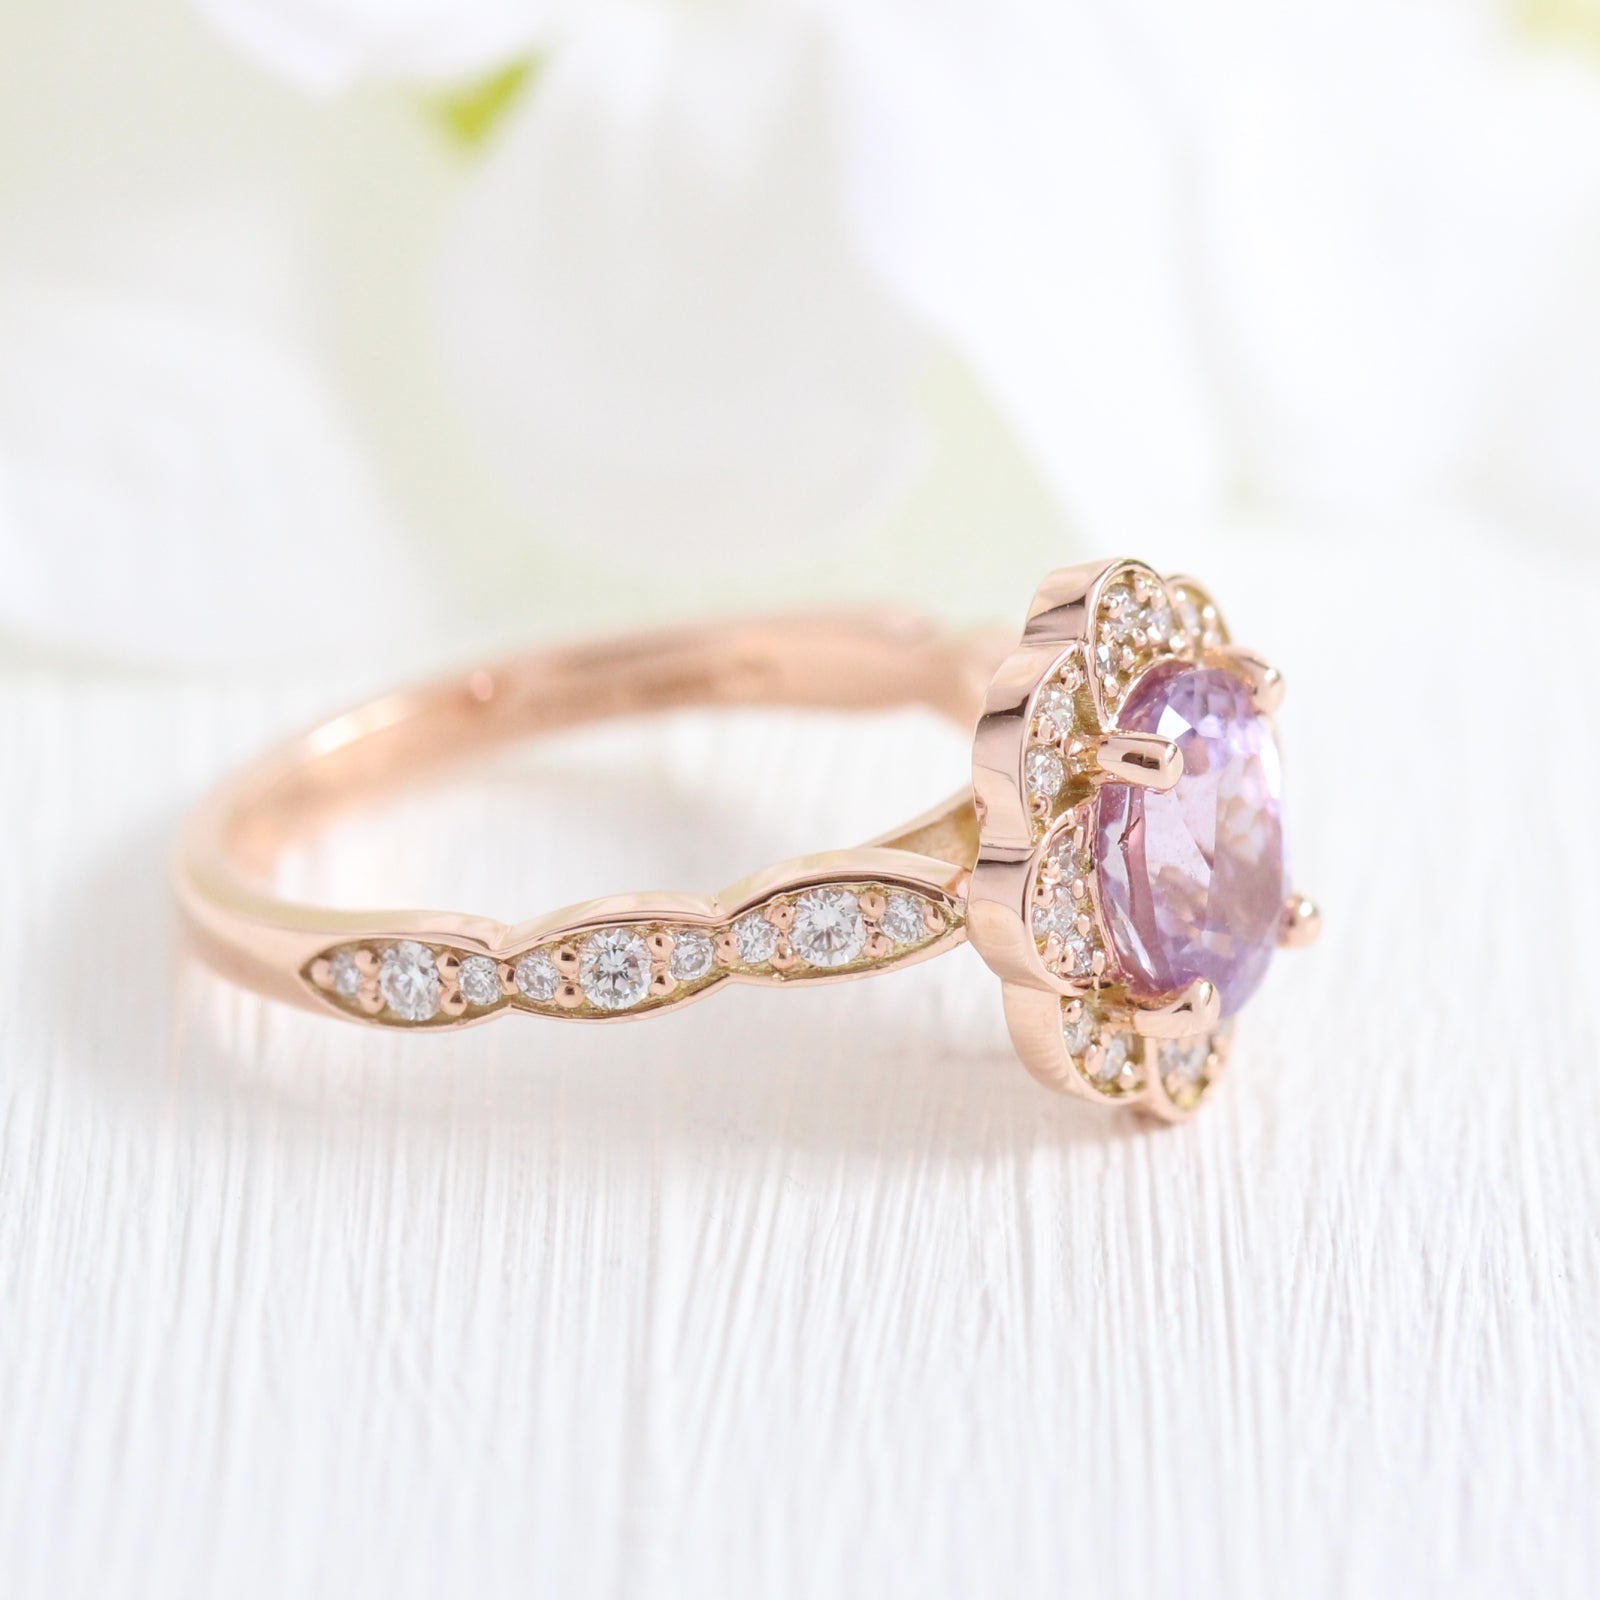 Purple Sapphire Engagement Ring Rose Gold Vintage Floral Diamond Ring by La More Design Jewelry